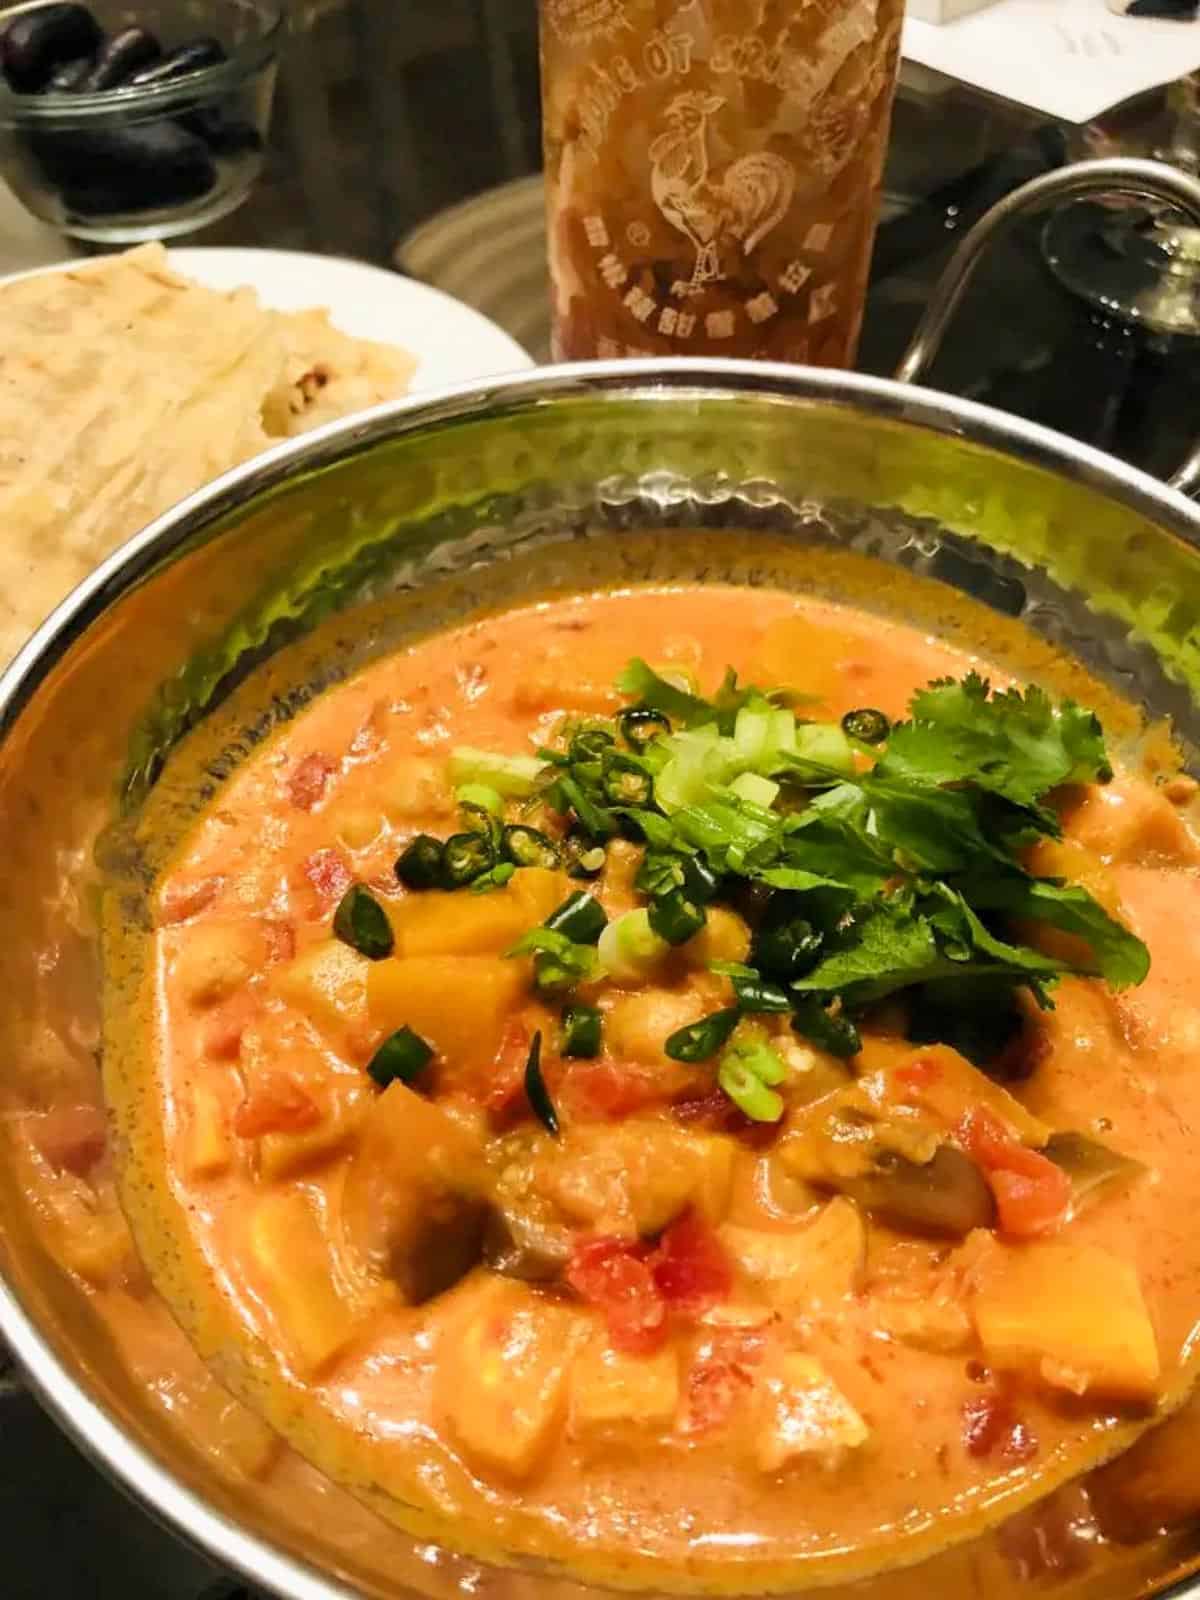 Thai Panang Curry with vegetables garnished with cilantro and green onions in a silver bowl. There is a plate with bread, bowl with olives, and bottle of hot sauce in the background.